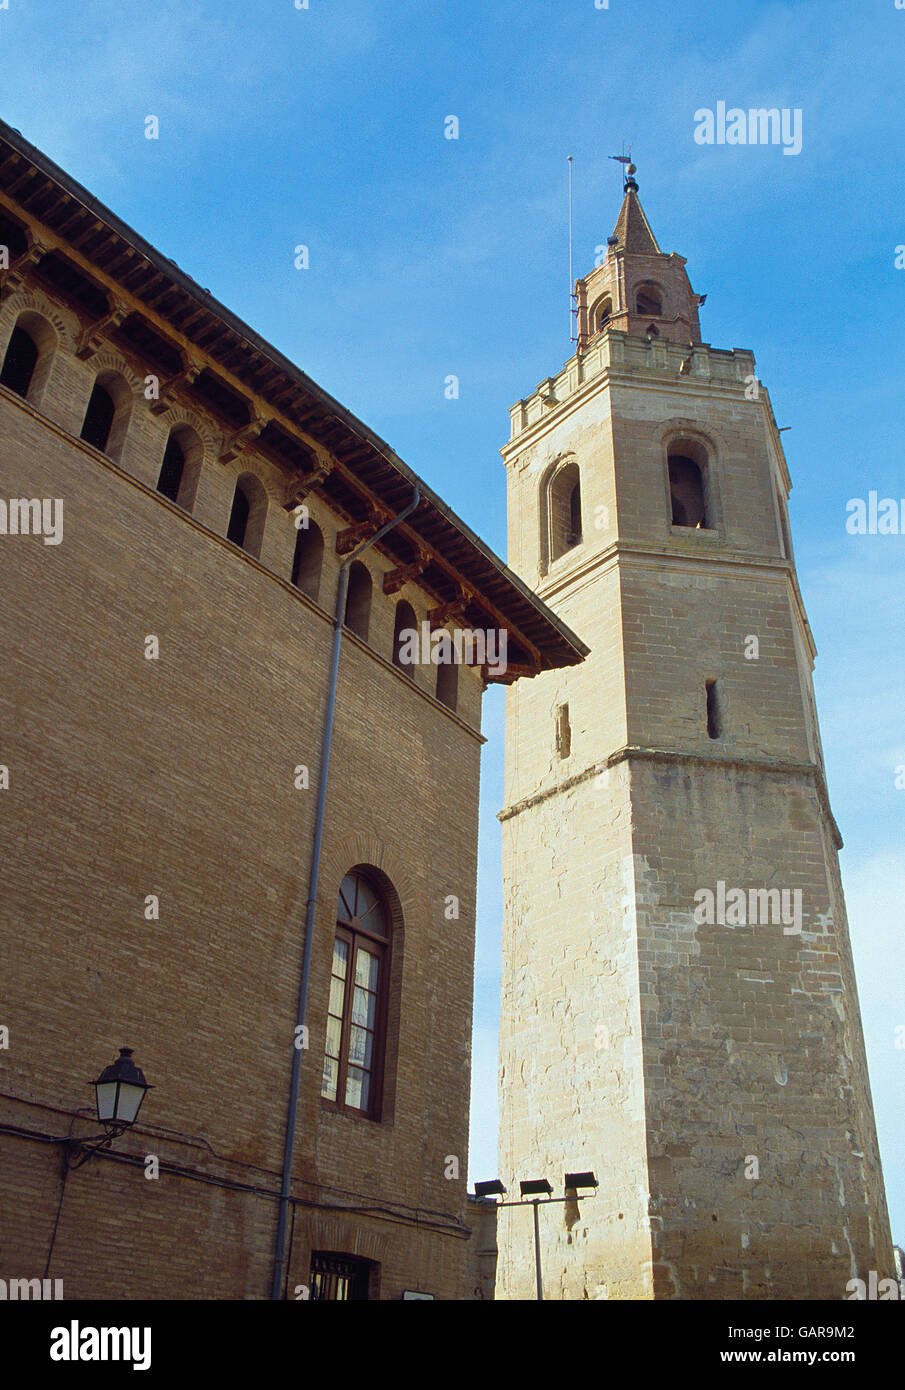 Tower of the cathedral. Barbastro, Huesca province, Aragon, Spain. Stock Photo